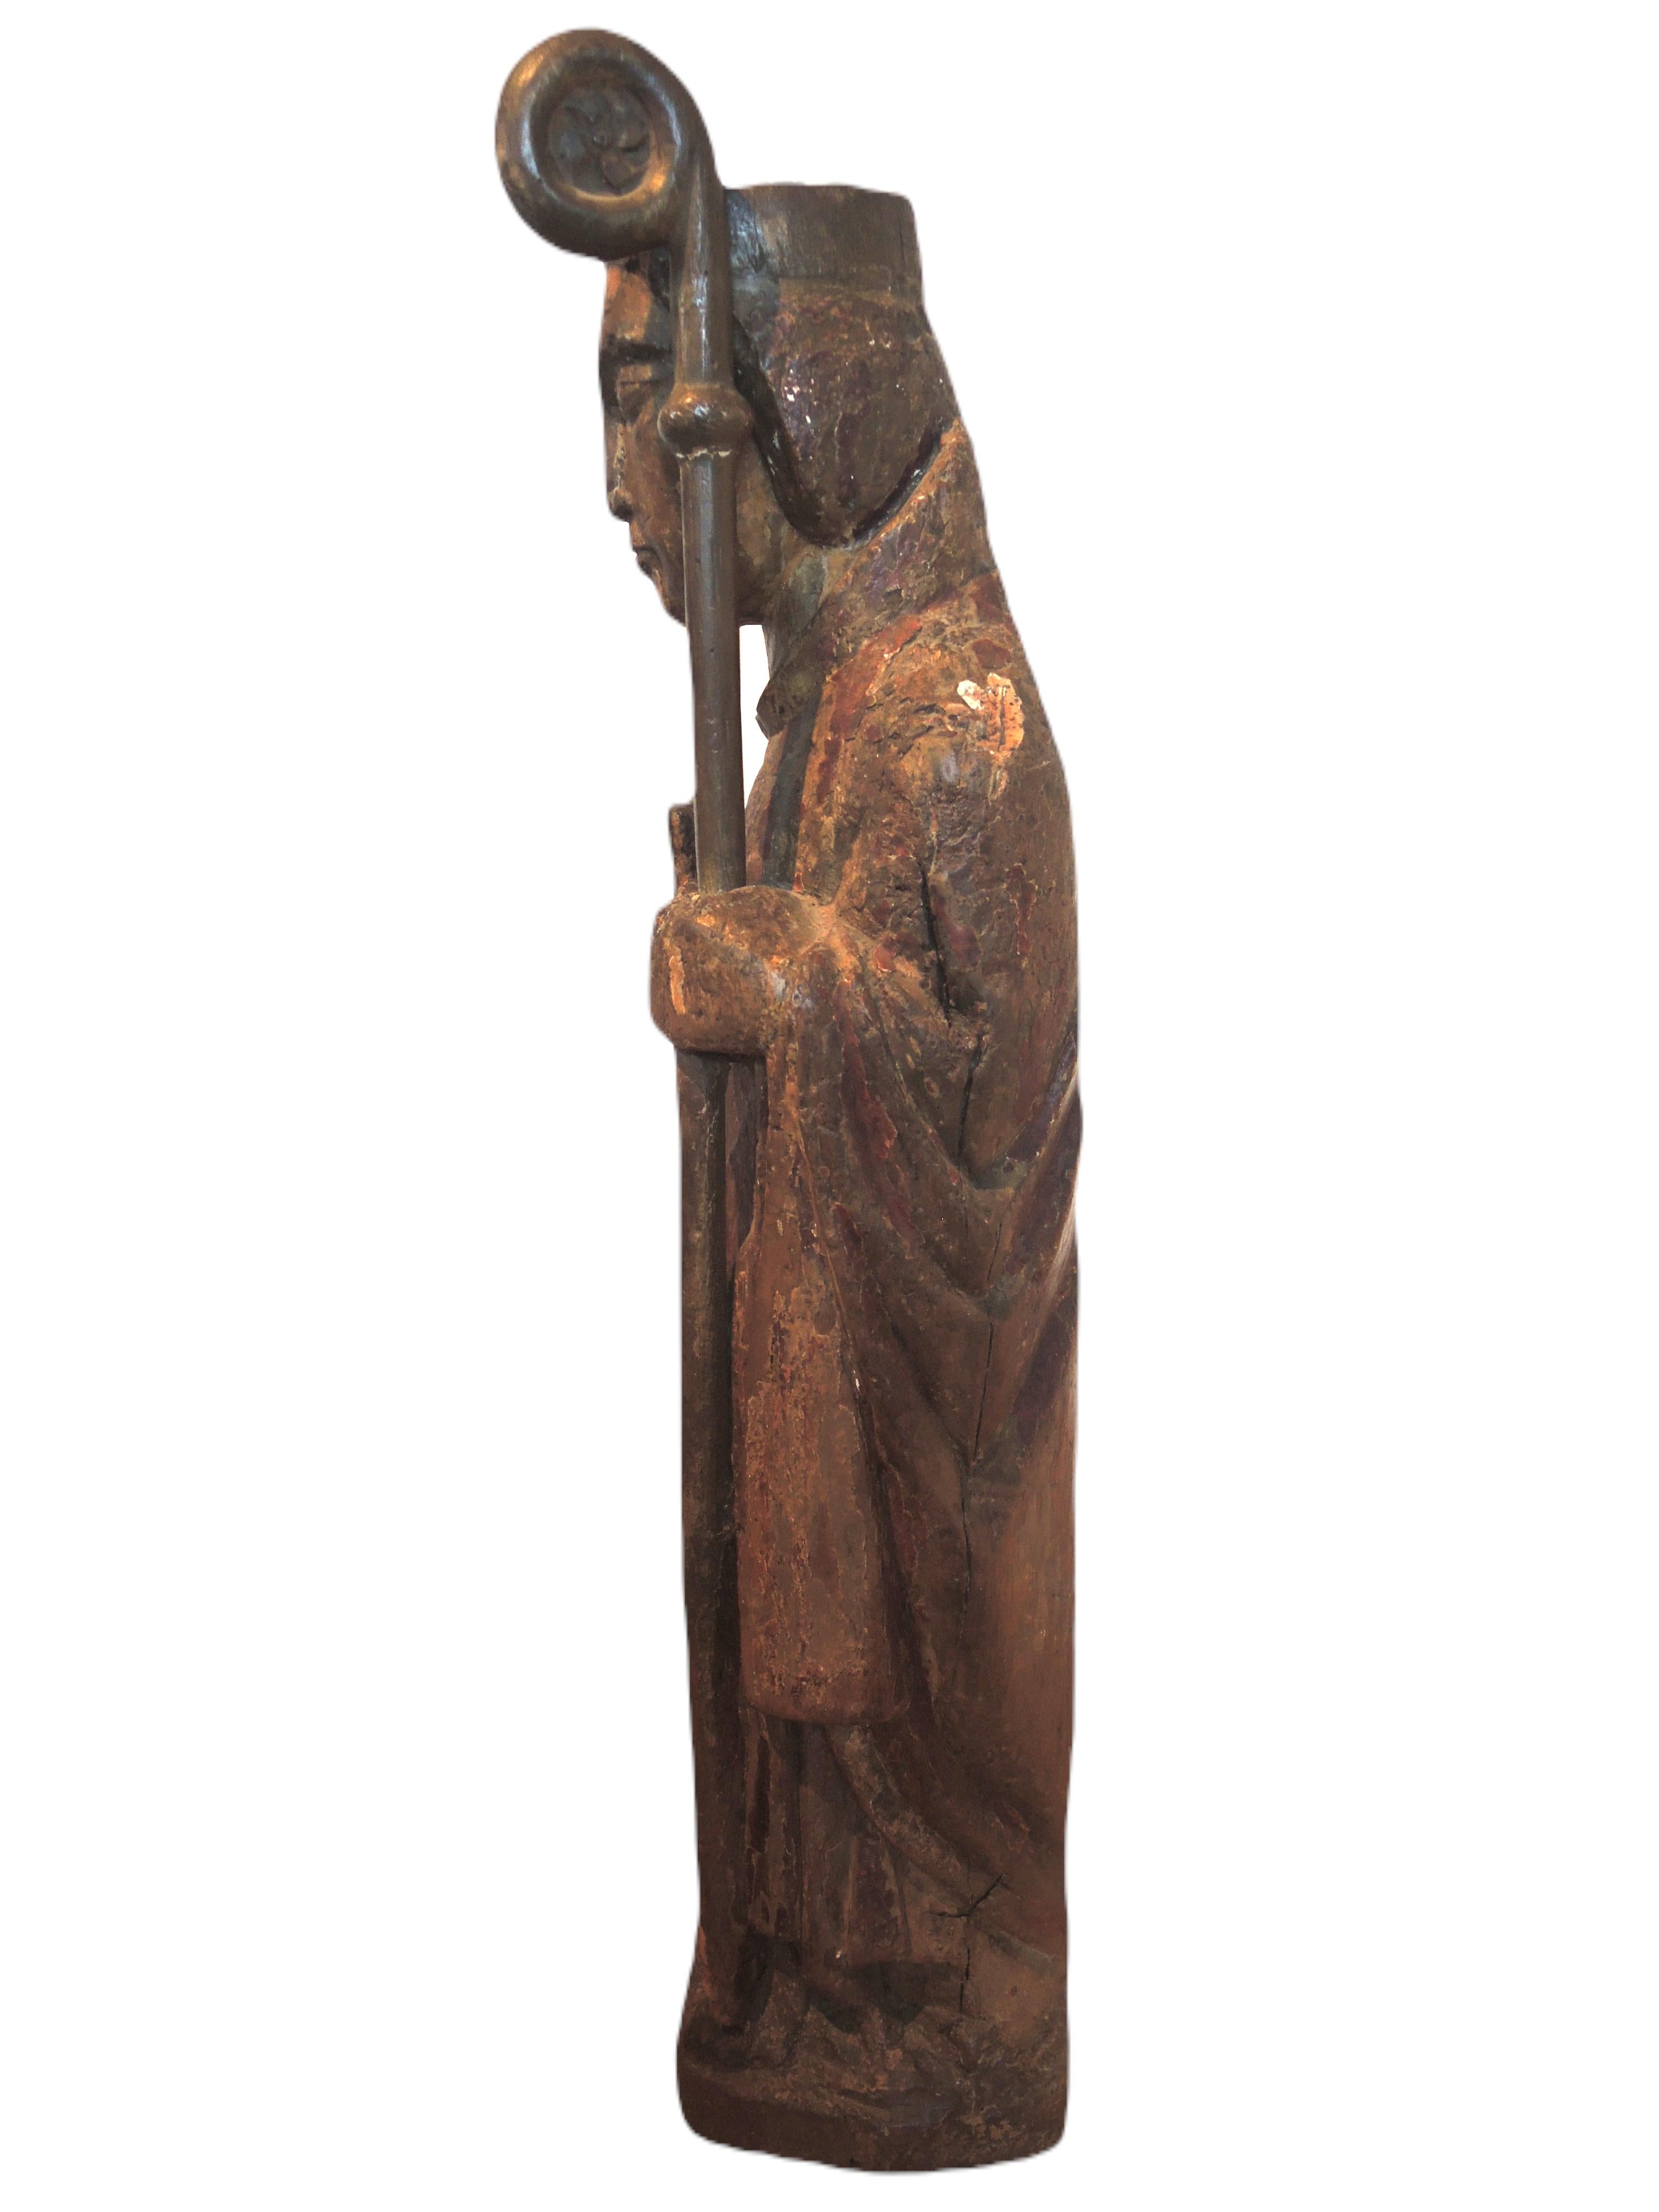 Catalan School of the 13th century. Wooden Bishop - Brown Figurative Sculpture by Unknown